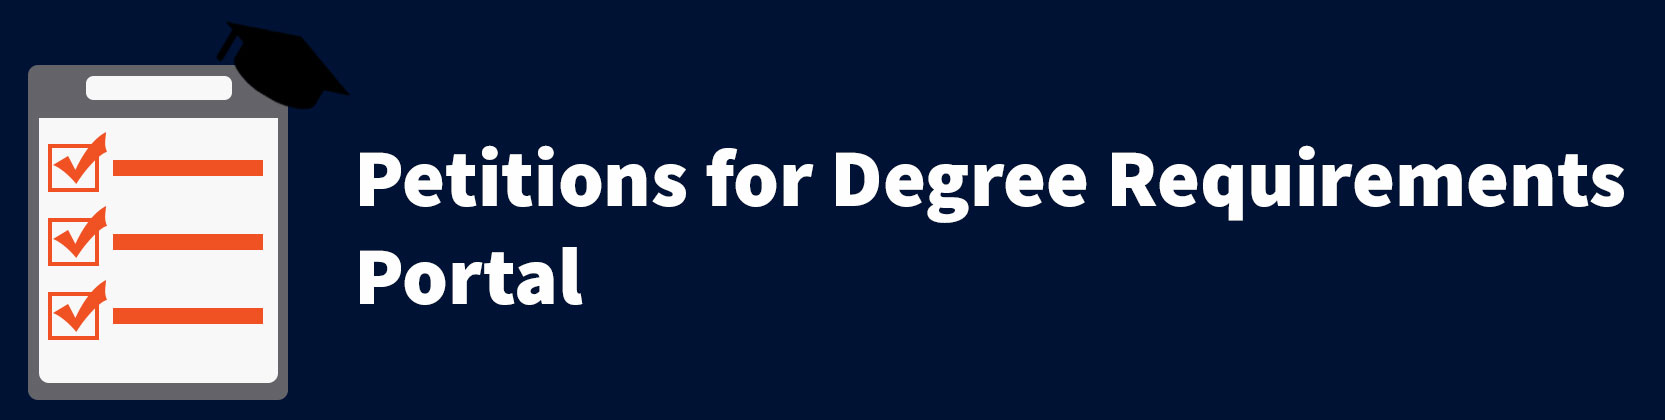 Checklist Petitions for Degree Requirements